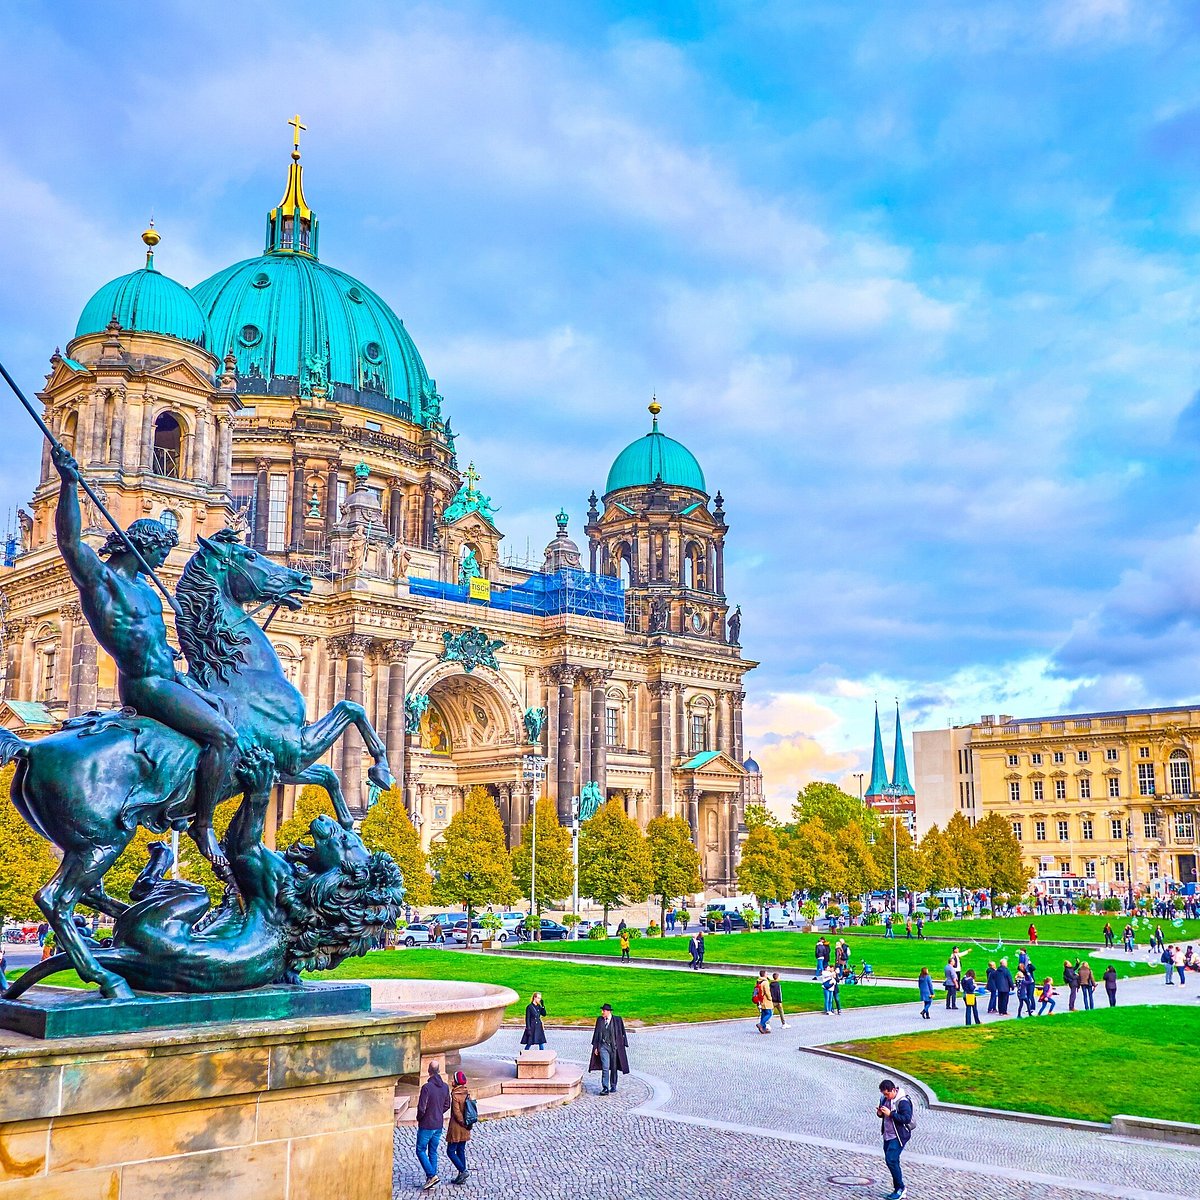 Rosotravel Berlin Tours All You Need to Know BEFORE You Go